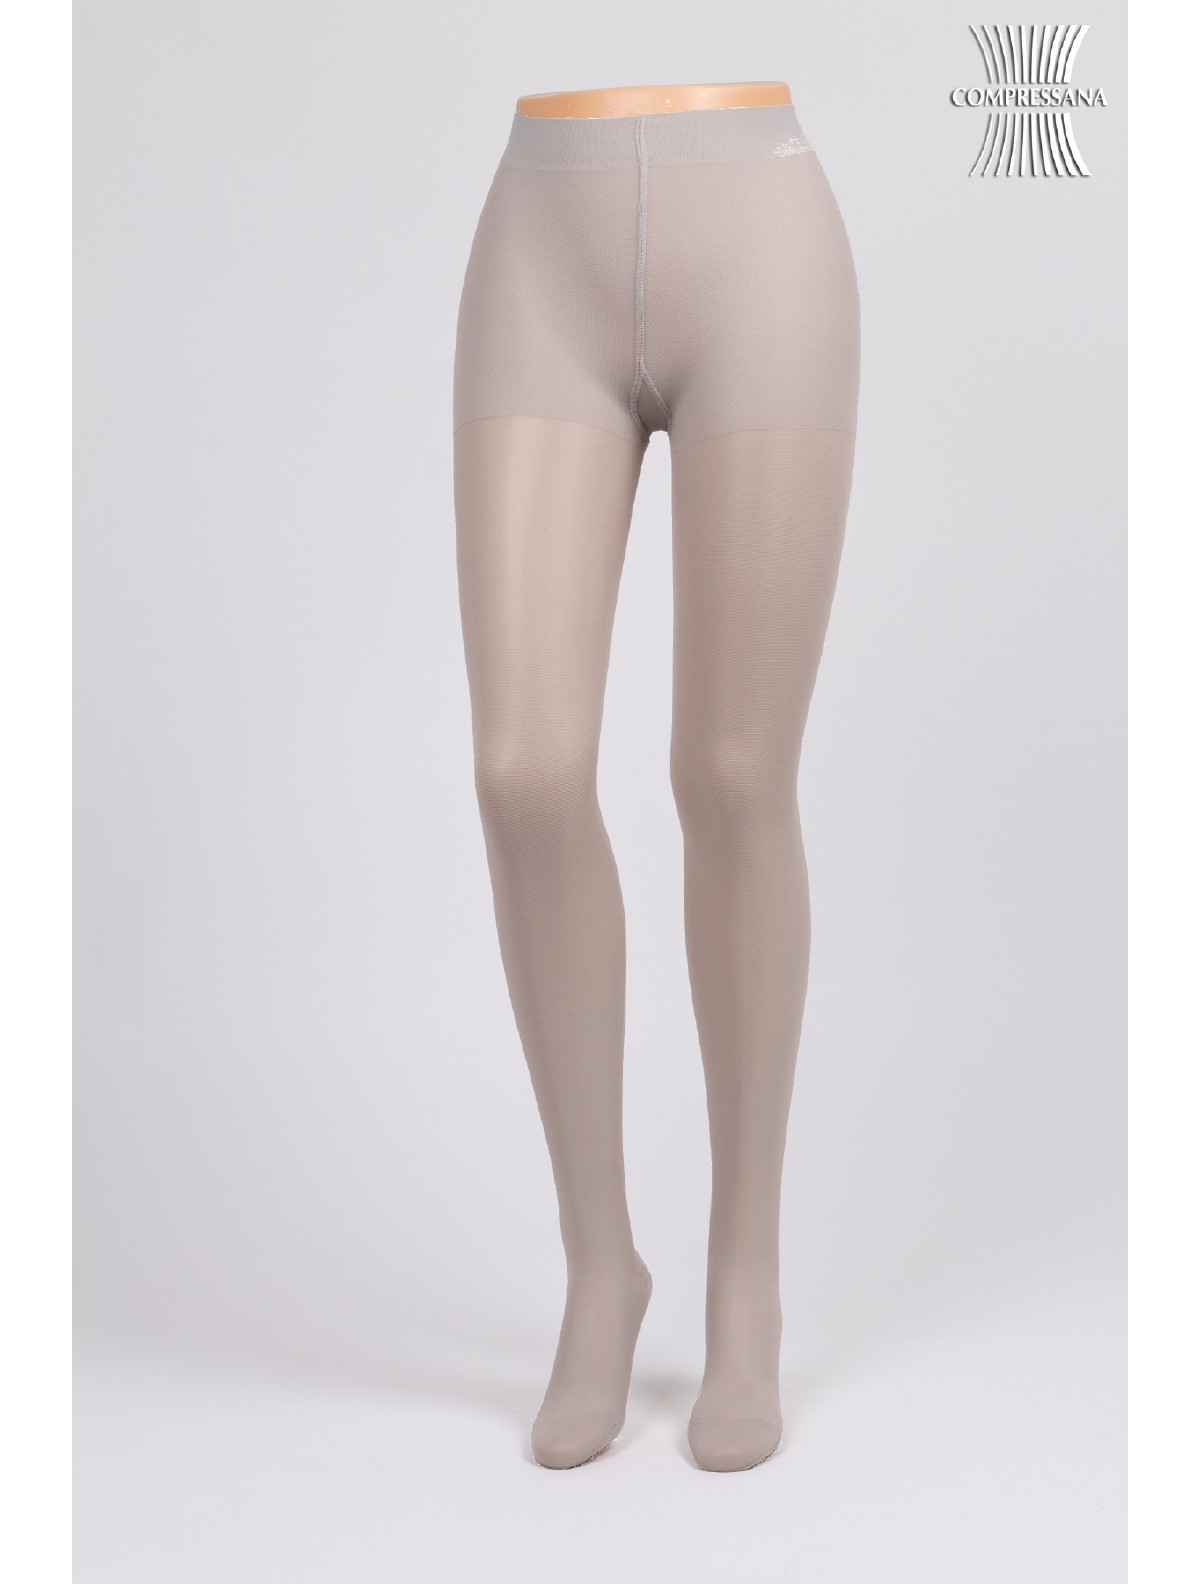 Compressana Calypso 140 Strong Support Tights